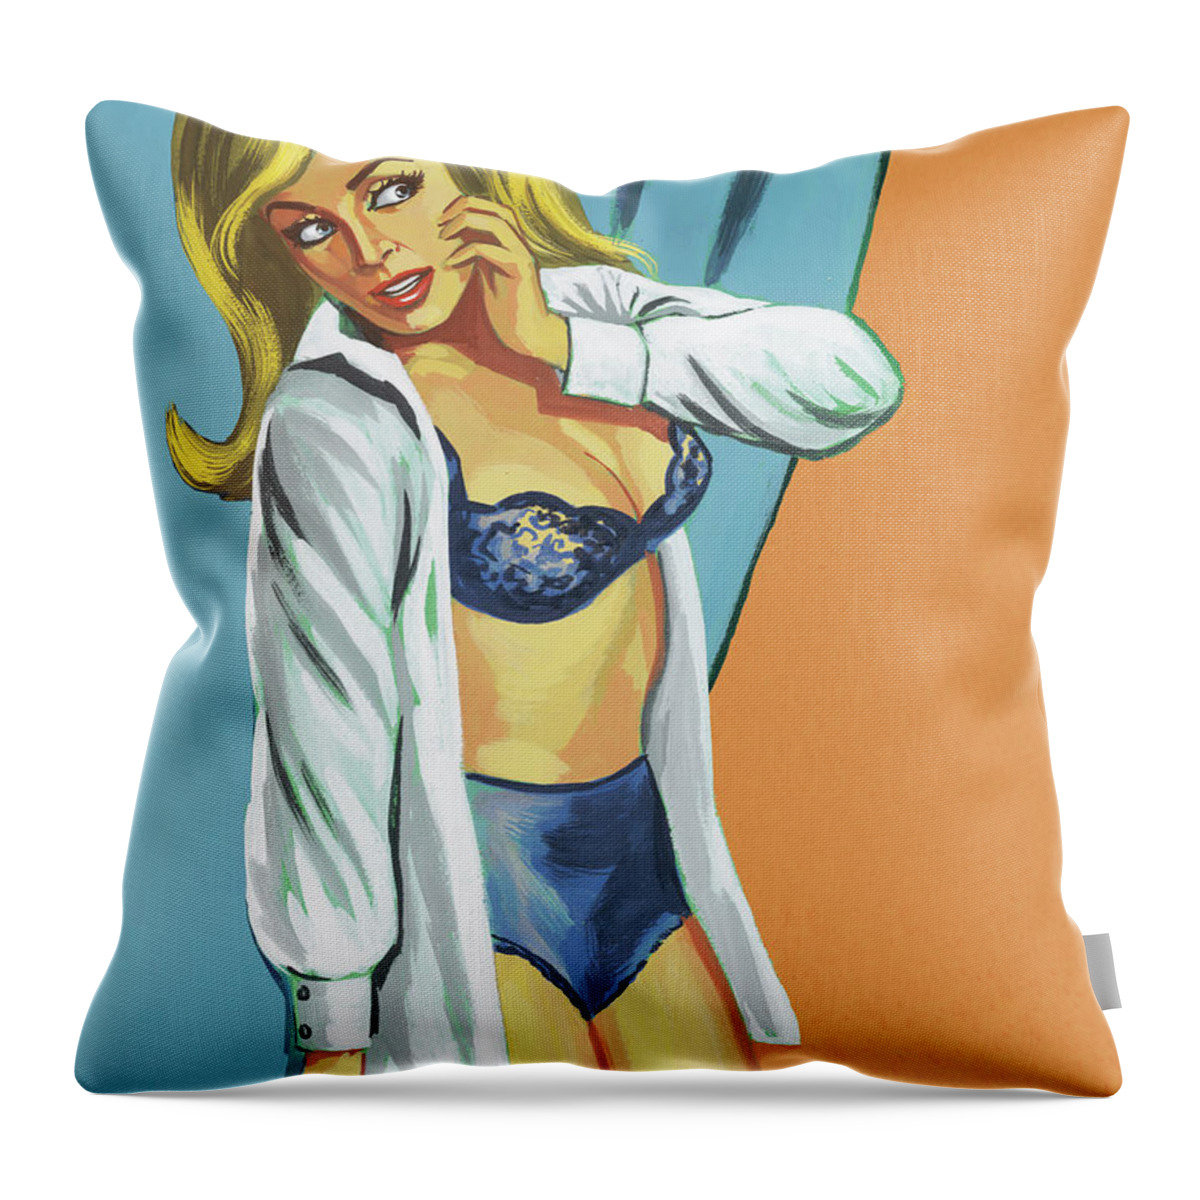 Adult Throw Pillow featuring the drawing Undressed Woman by CSA Images